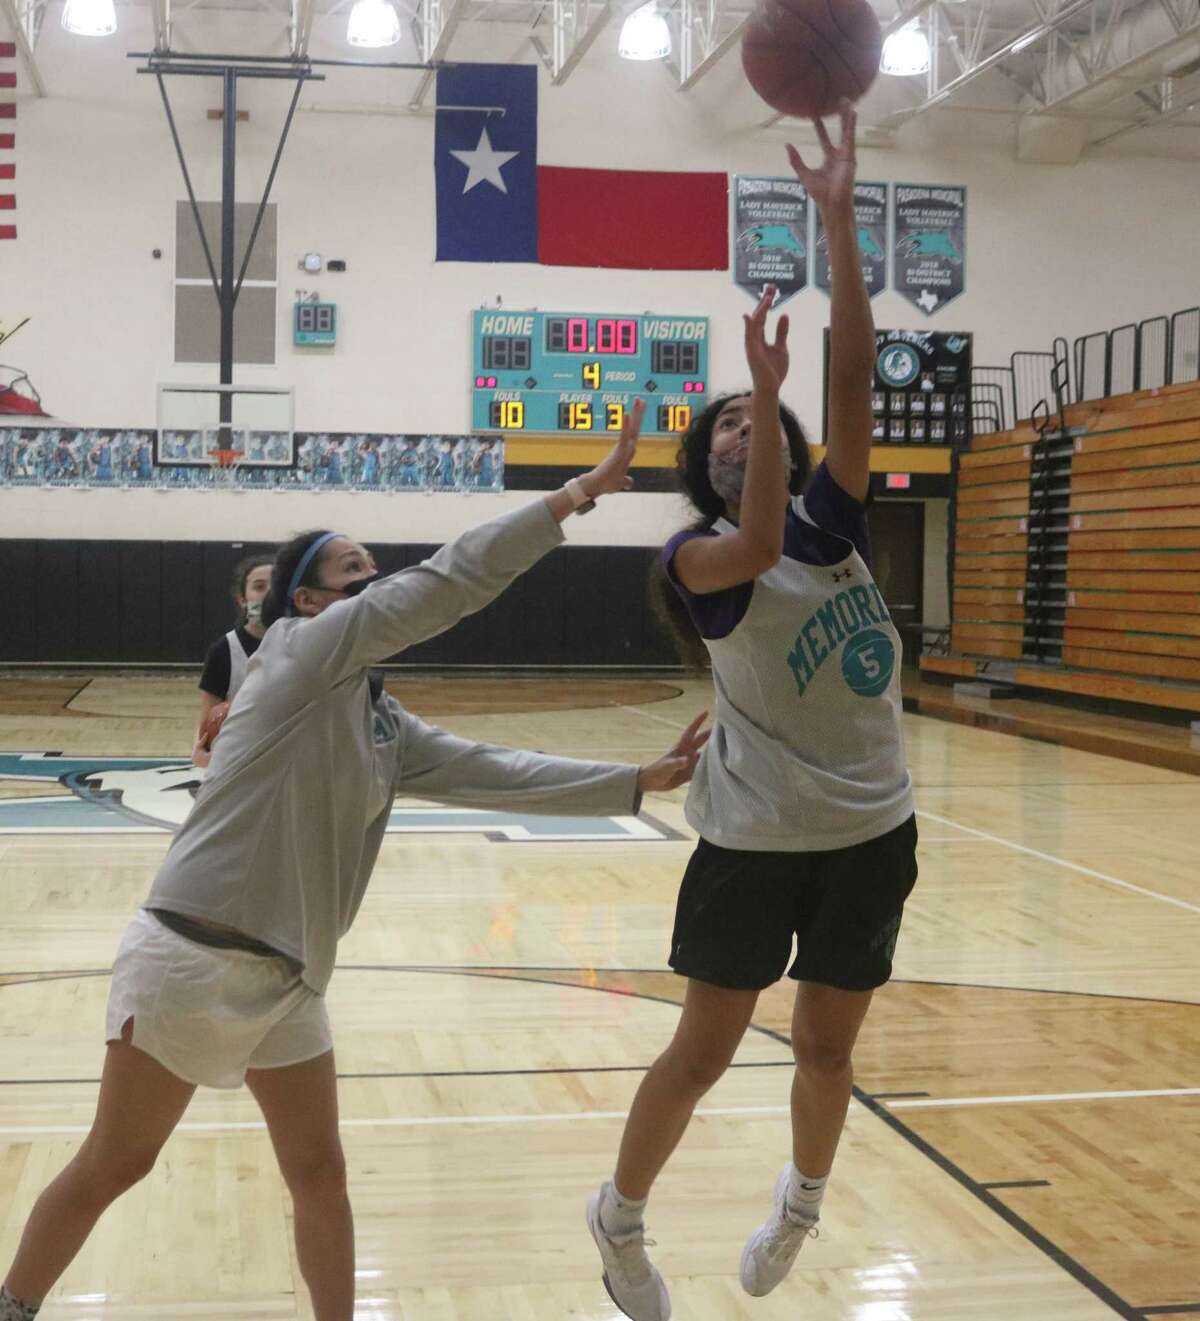 Pasadena Memorial head coach Jennifer Salazar makes senior Mayza Sharry work harder for a basket in the paint during a Monday workout. The Lady Mavs have to make Summer Creek work for its points in the paint come Thursday night. Tipoff is 6:30 at North Shore HS.